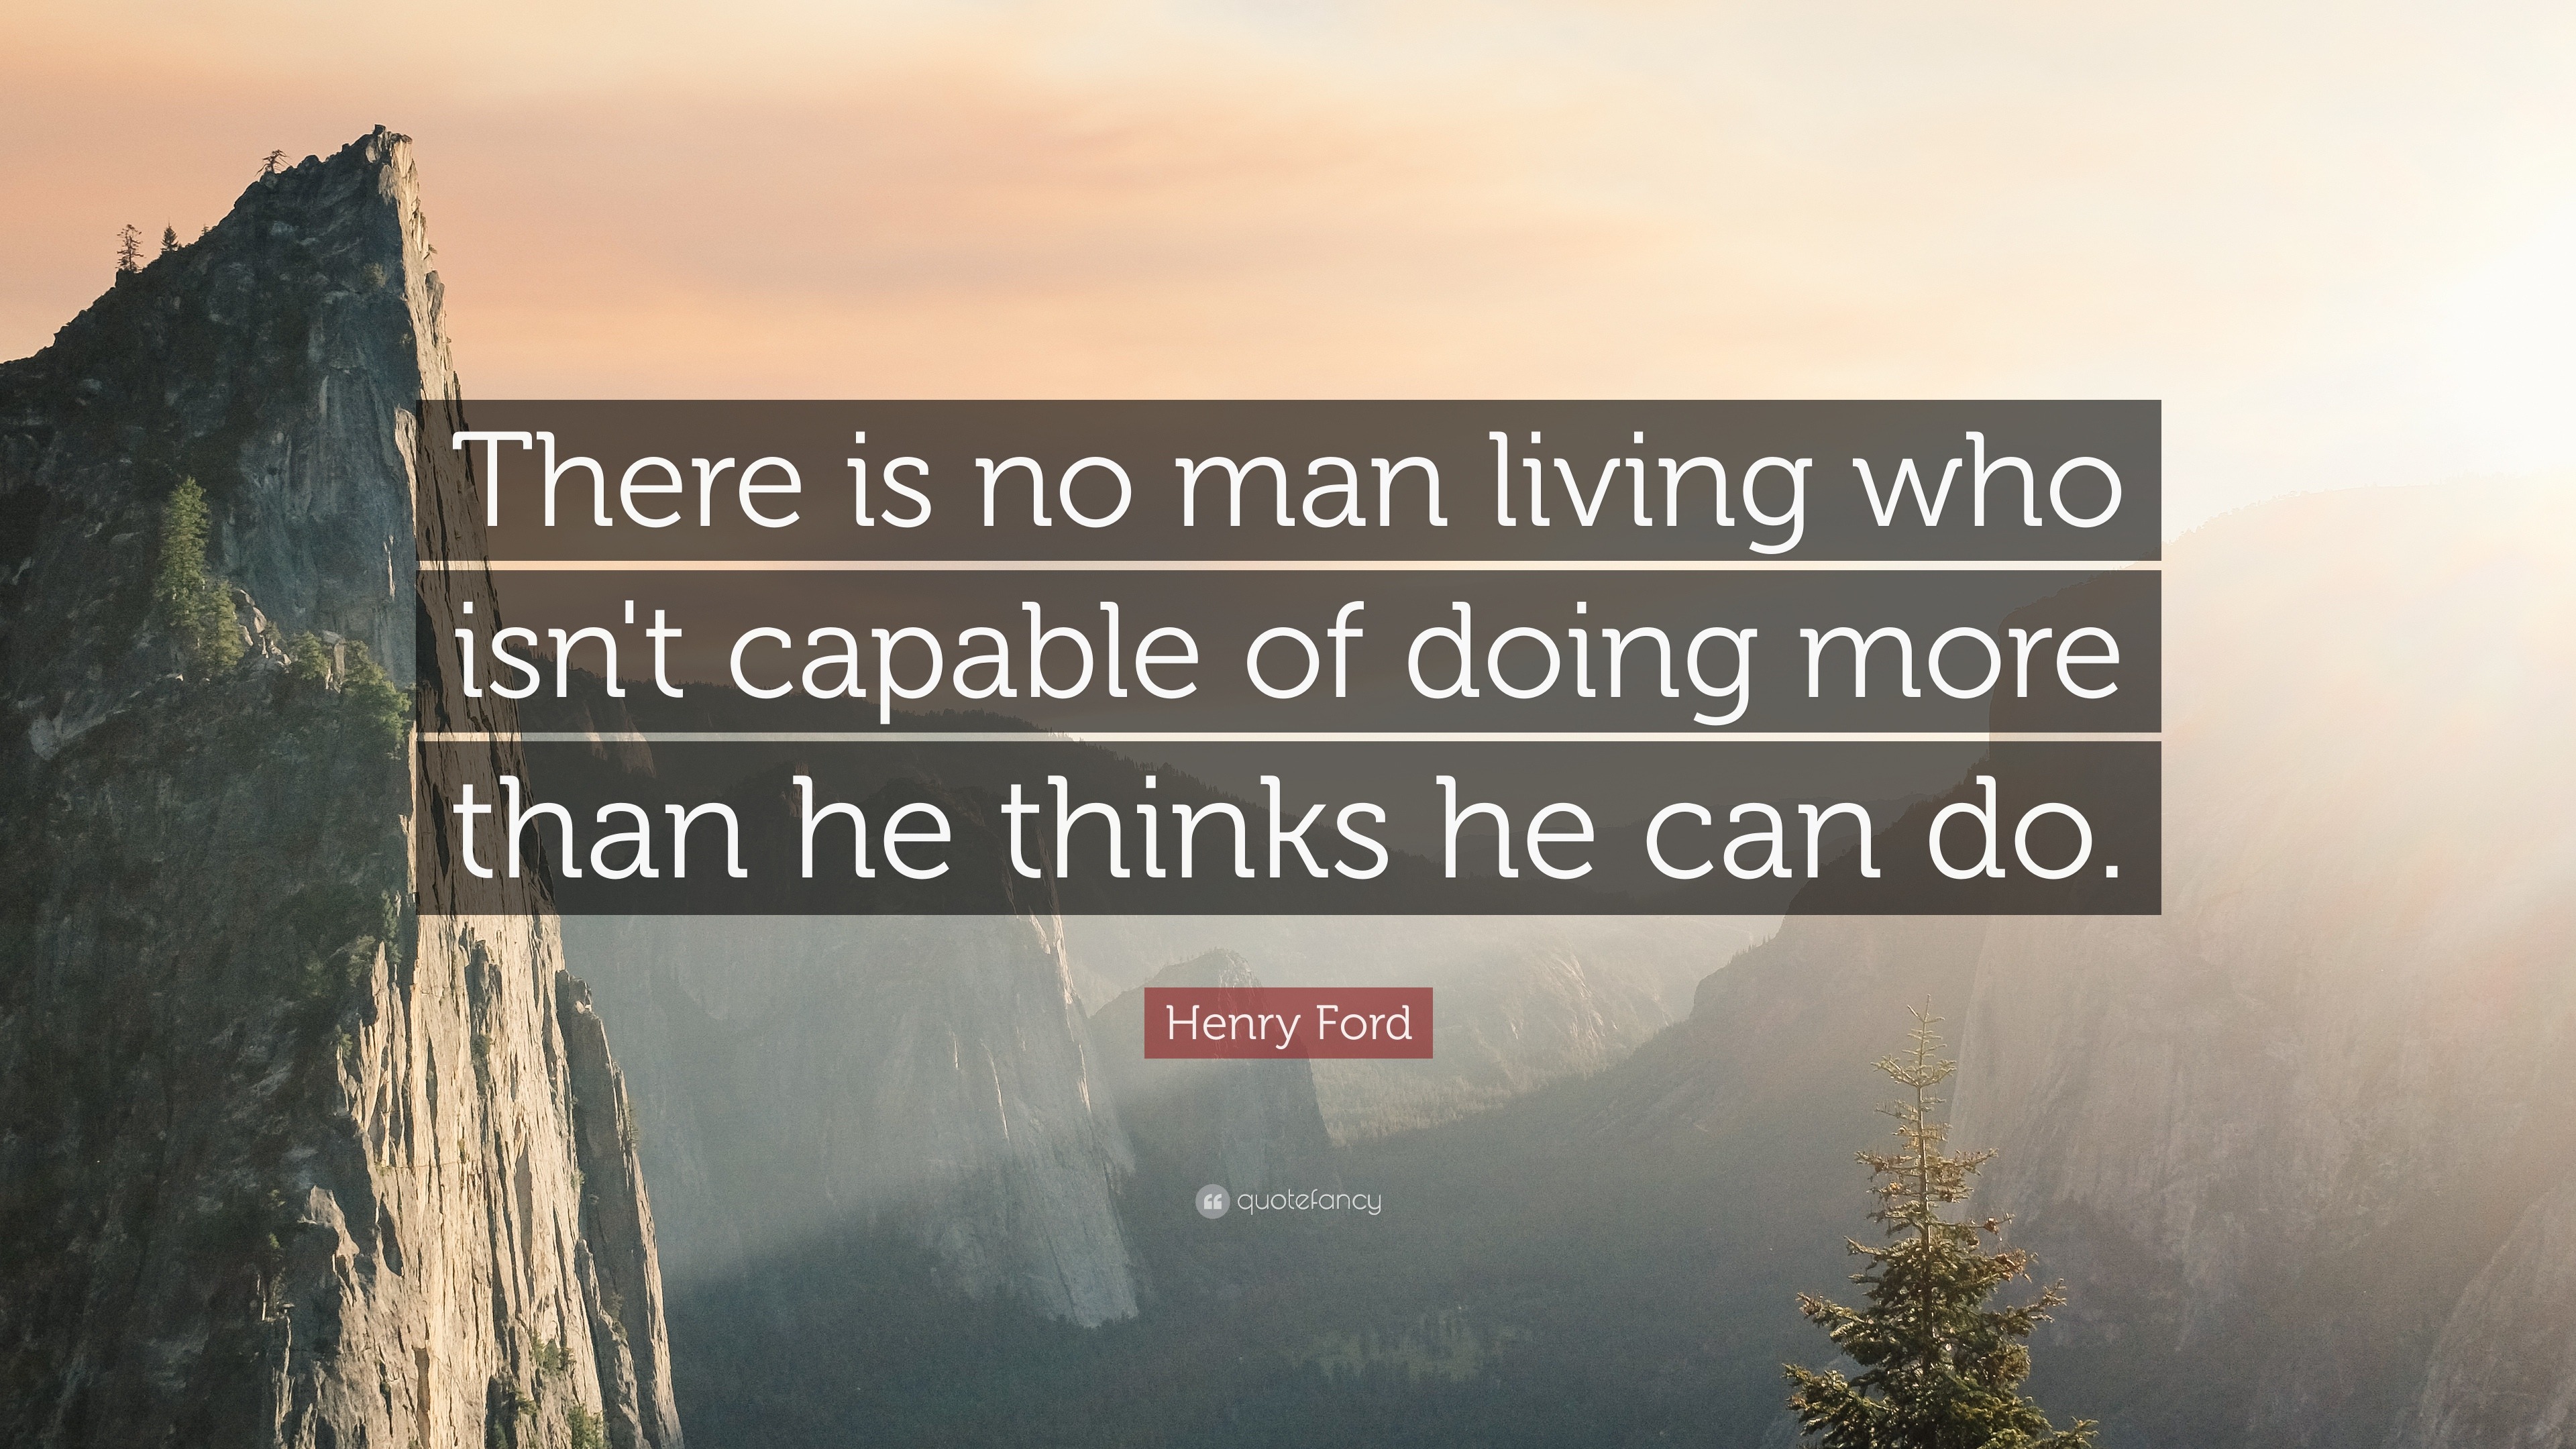 Henry Ford Quote: “There is no man living who isn't capable of doing ...